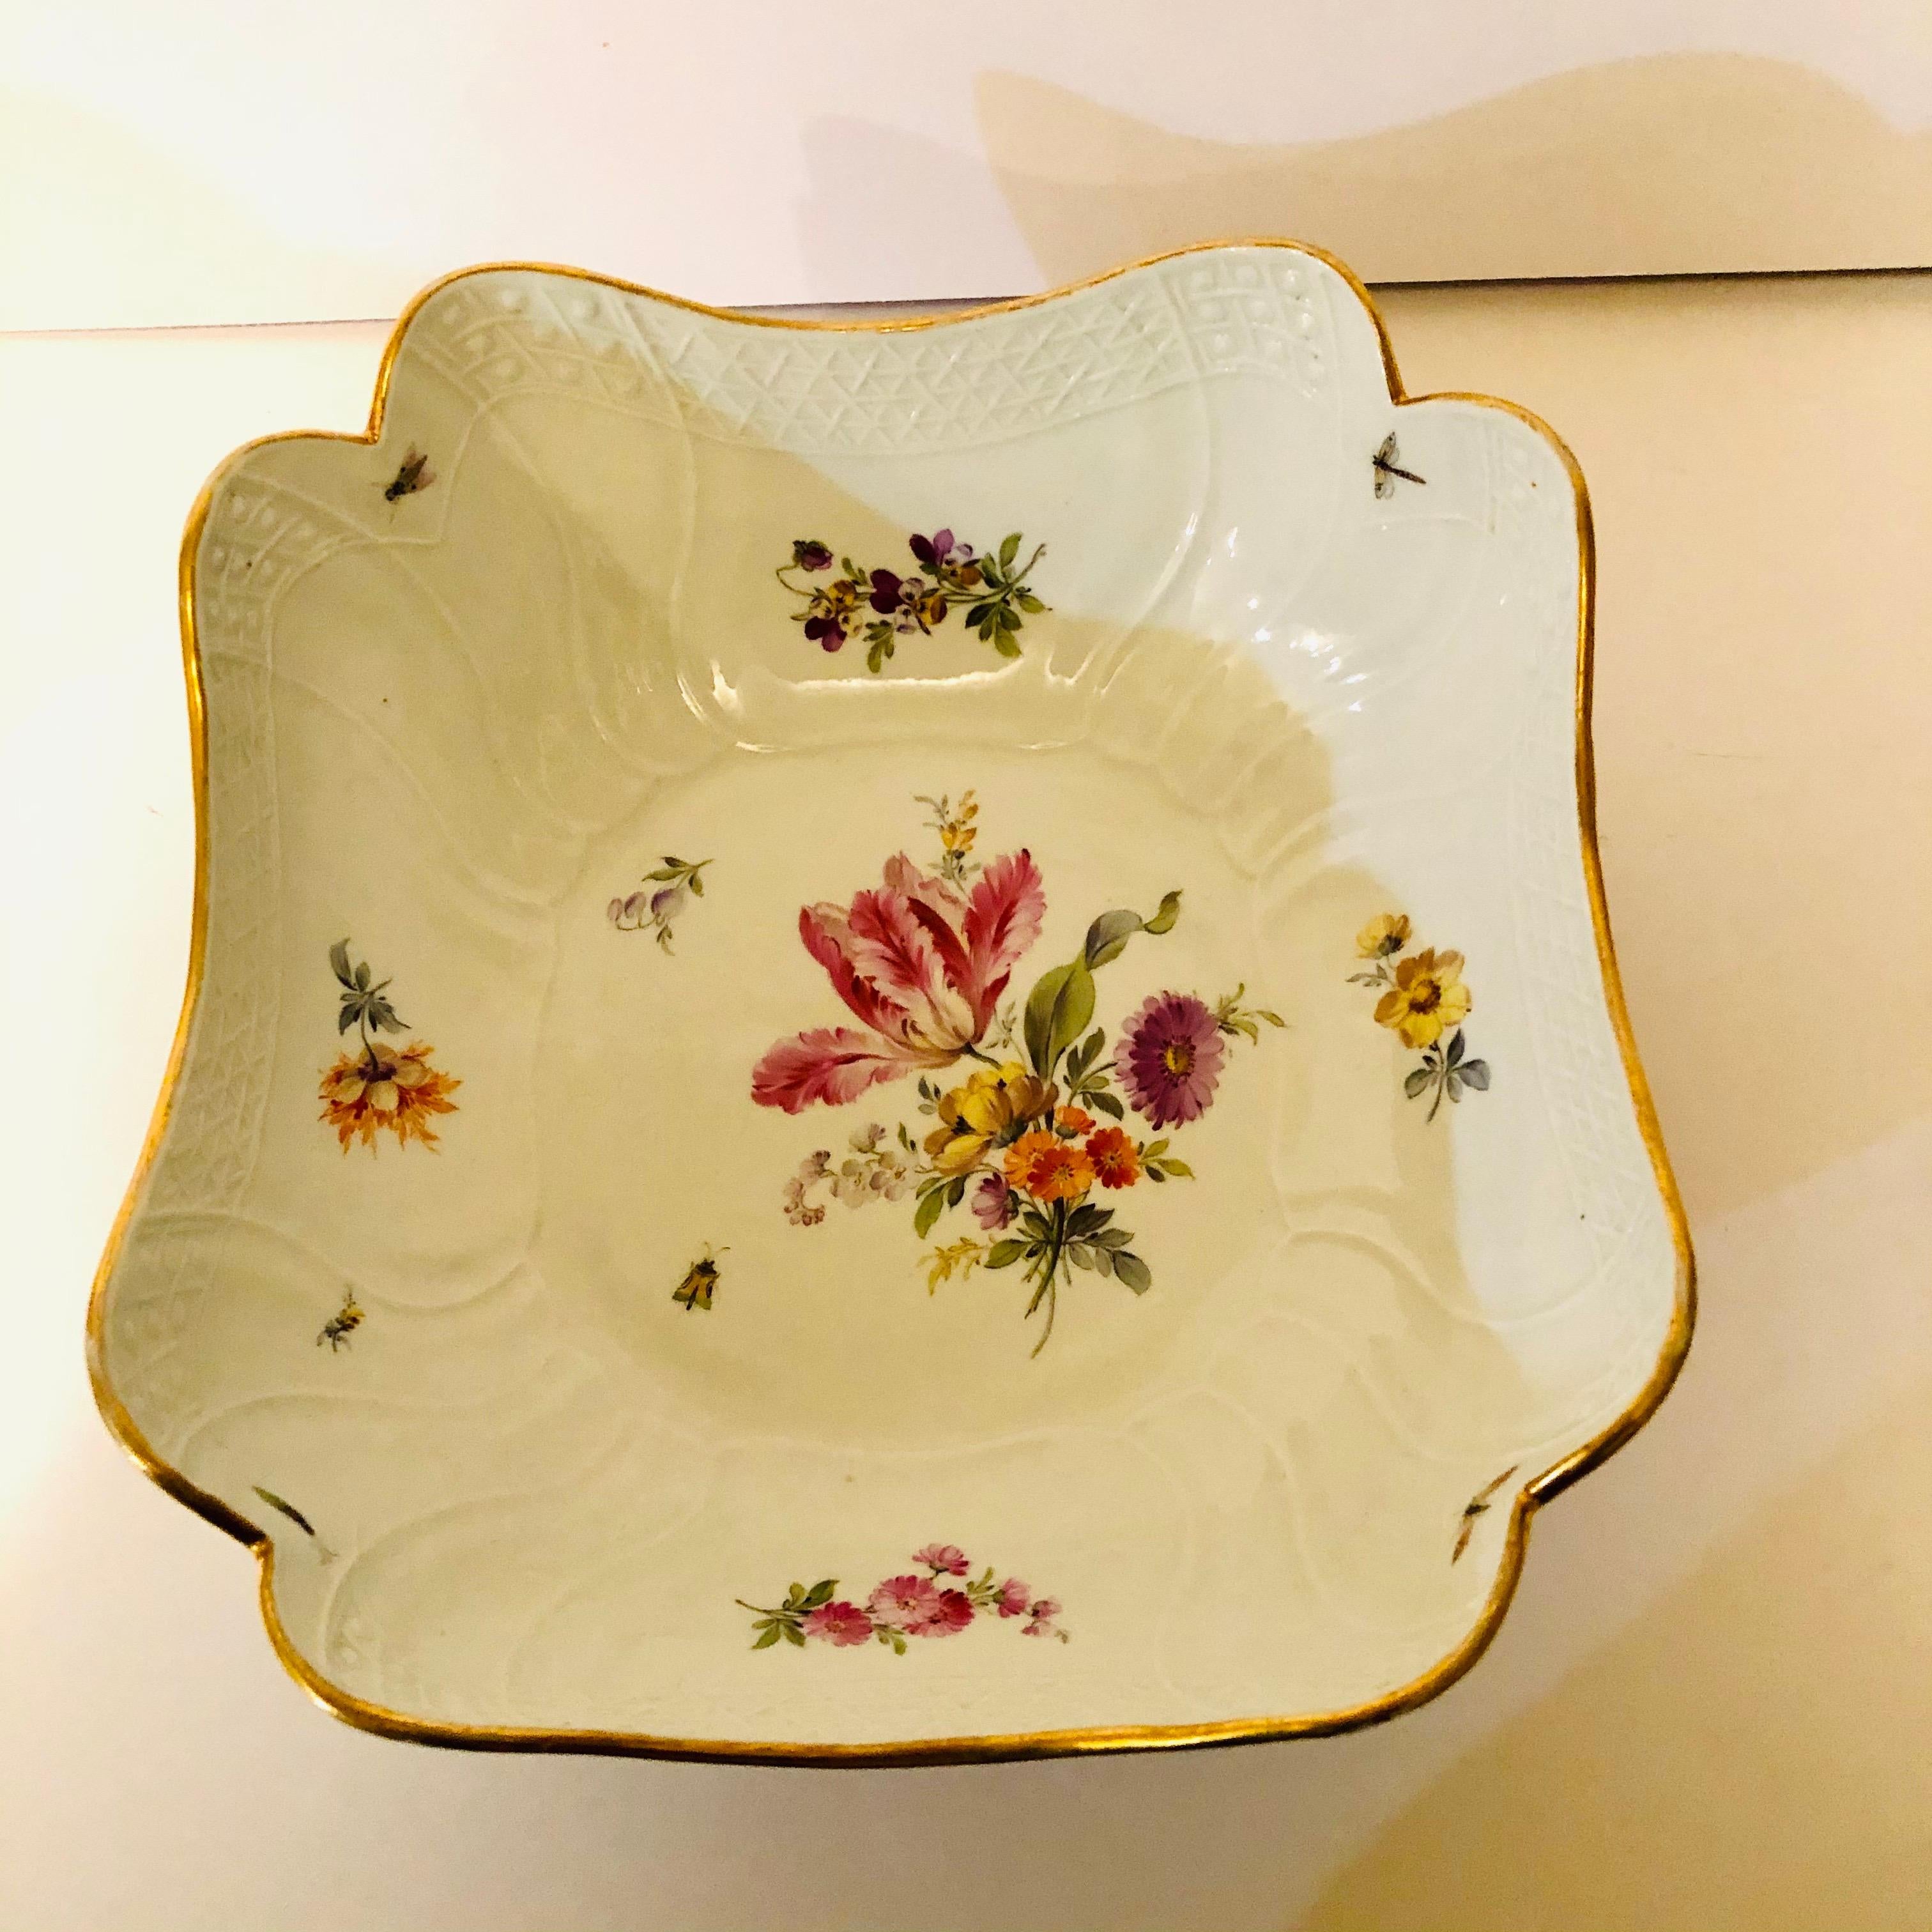 German Meissen Four Cornered Deep Serving Bowl from the 1880s with Five Flower Bouquets